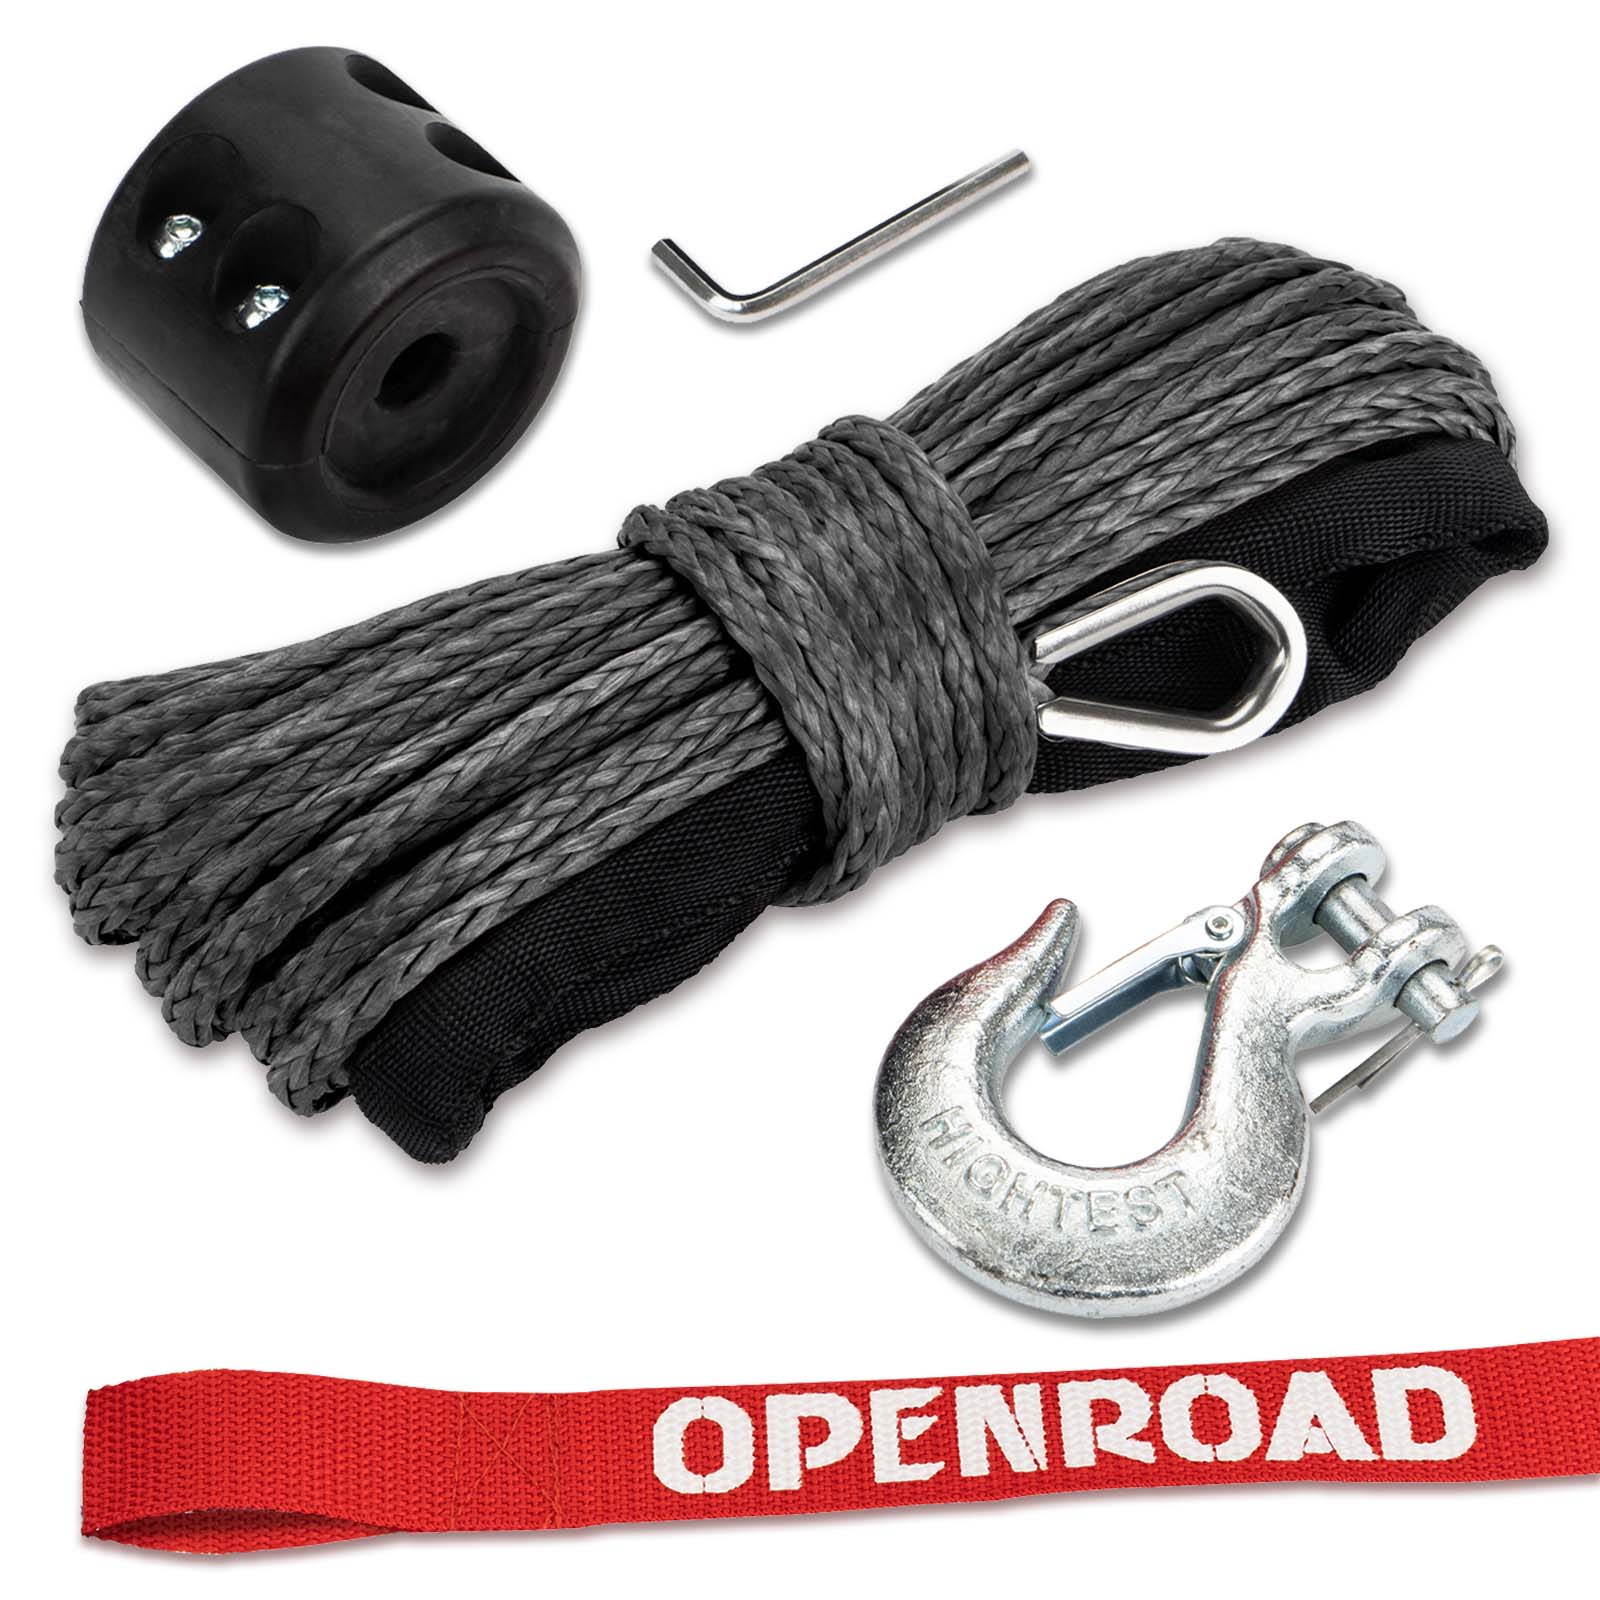 OPENROAD Synthetic Winch Rope 1/4" x 50'Winch Rope Extension with Black Removable Hook and ATV New Adjustable Rubber Blocks  openroad4wd.com Gray  